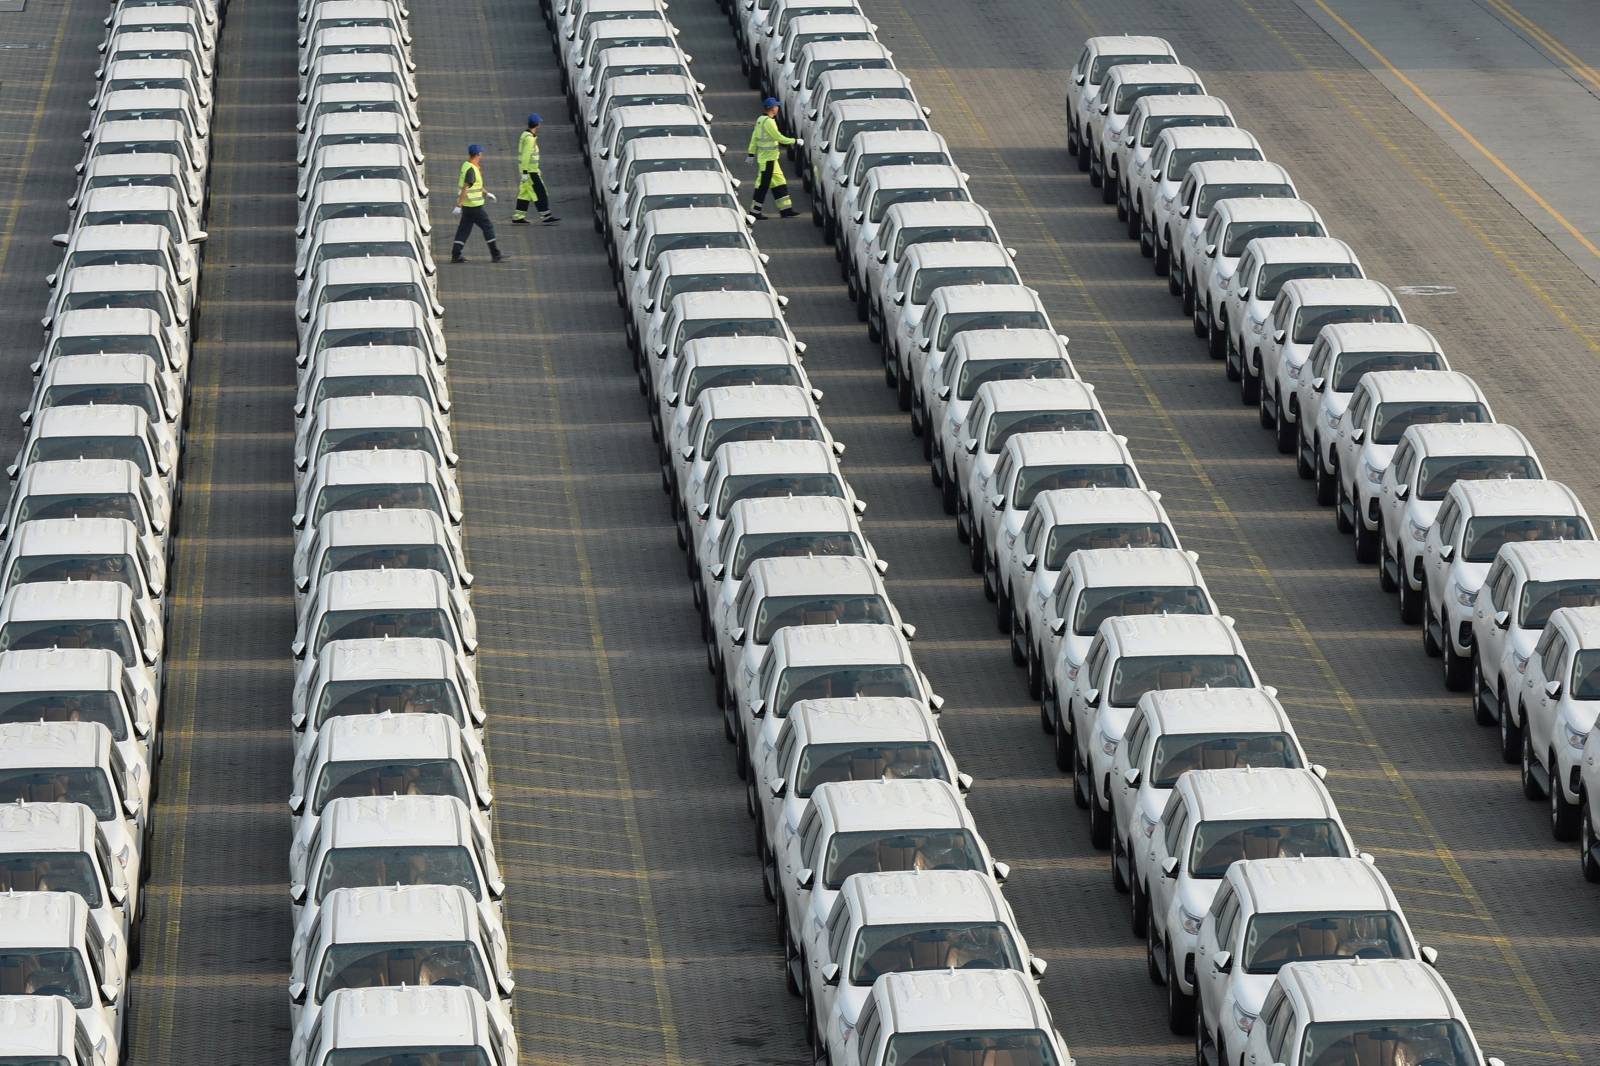 Workers walk among the newly arrived imported Toyota cars at the Shenzhen Dachan Bay Terminals in Guangdong